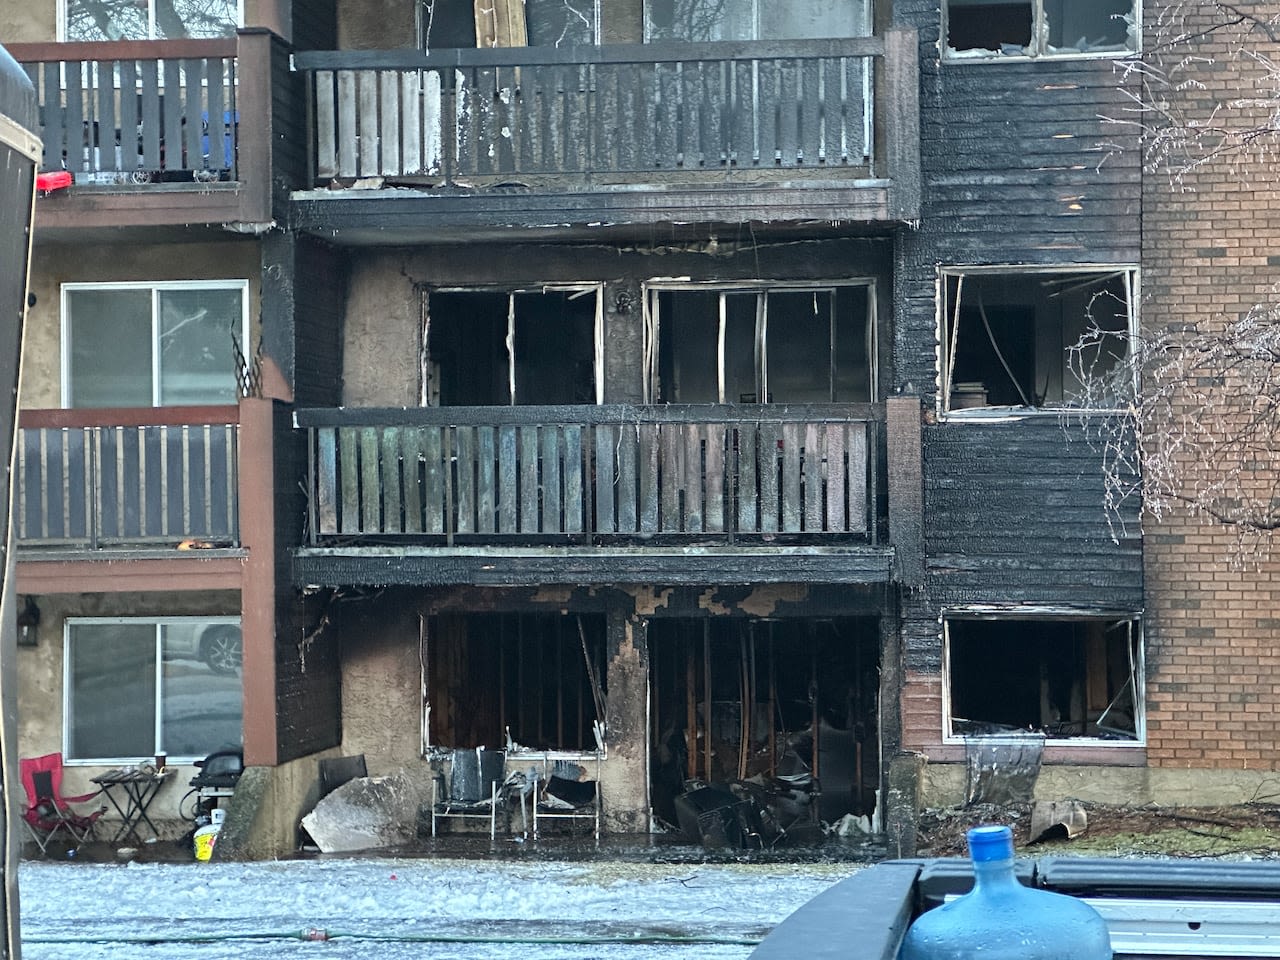 Body of 70-year-old Edmonton man found in building wreckage, 3 months after fire